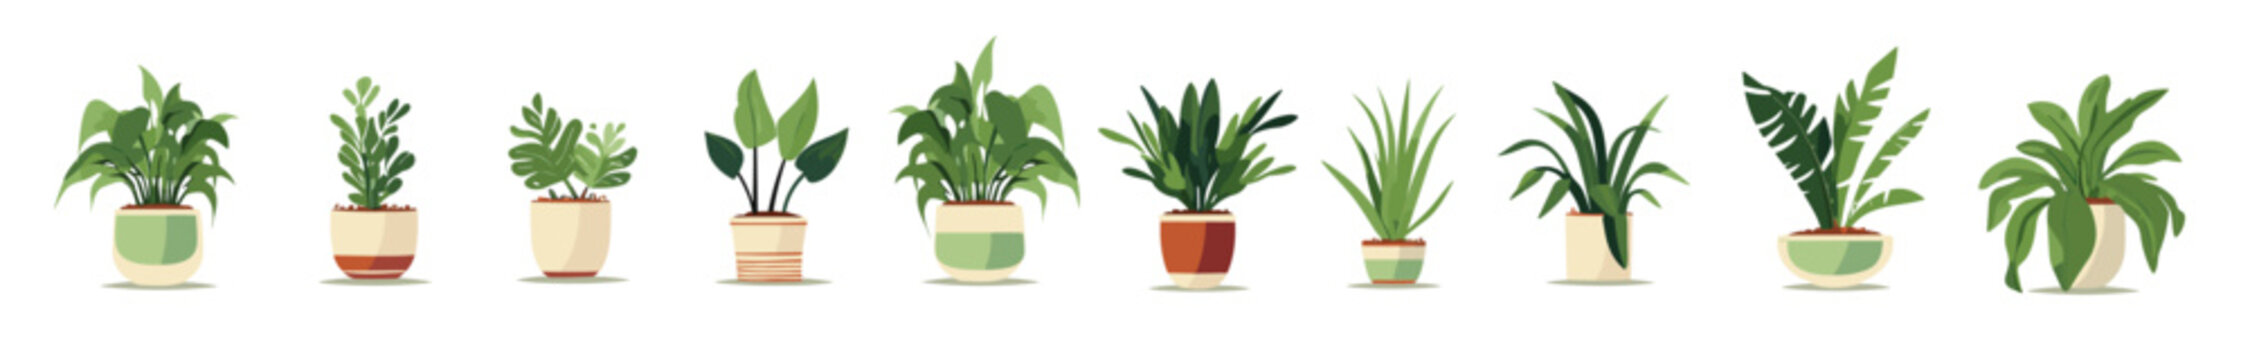 Fototapeta Modern house plants in different clay pots and planters. Home garden vector illustration.